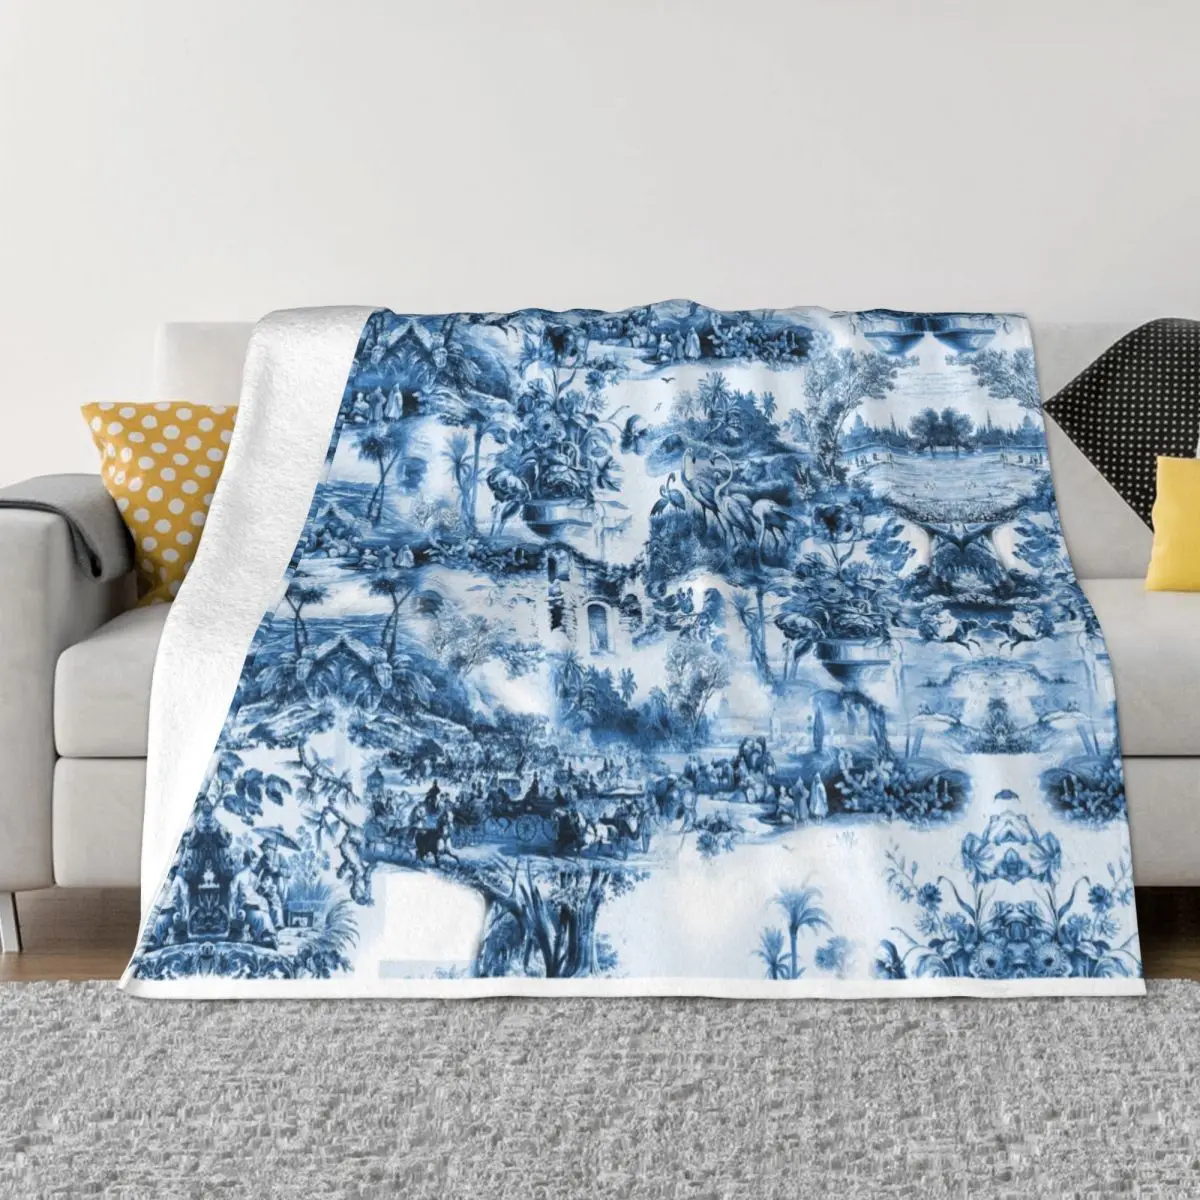 

French Navy Blue Toile De Jouy Blanket Warm Fleece Soft Flannel Throw Blankets for Bedding Couch Office Autumn